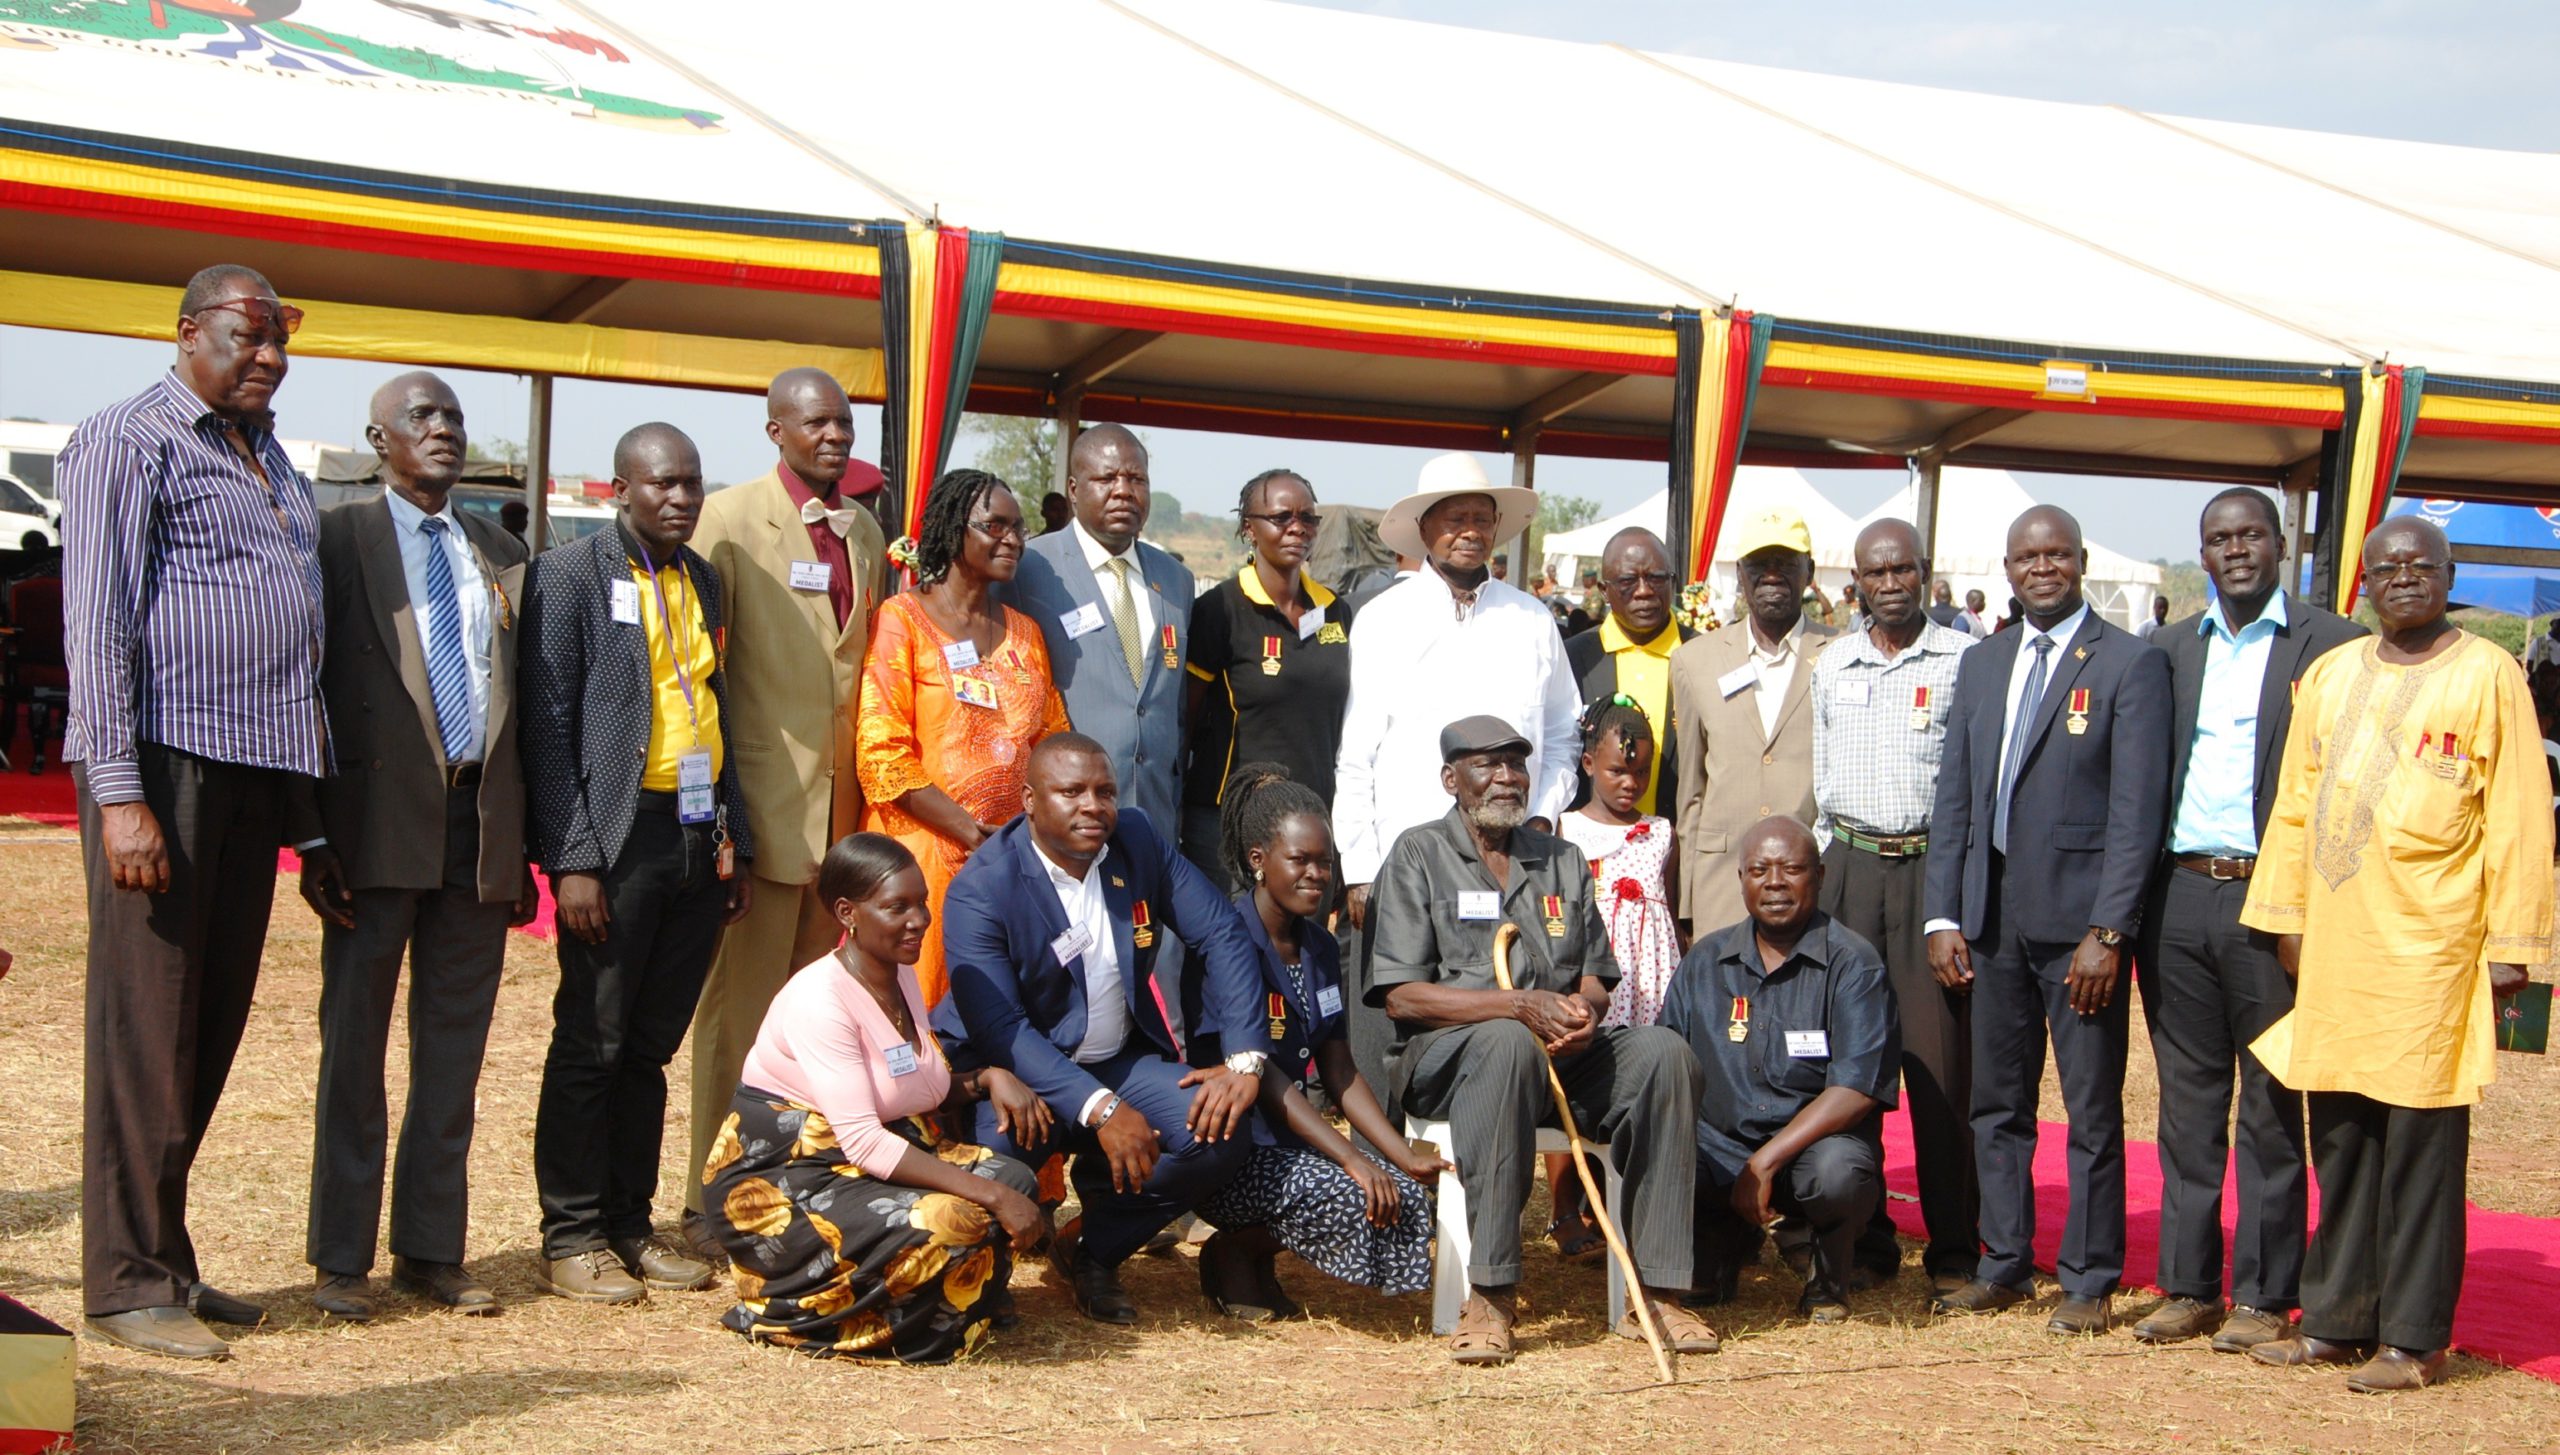 Some medalists pose with General Museveni